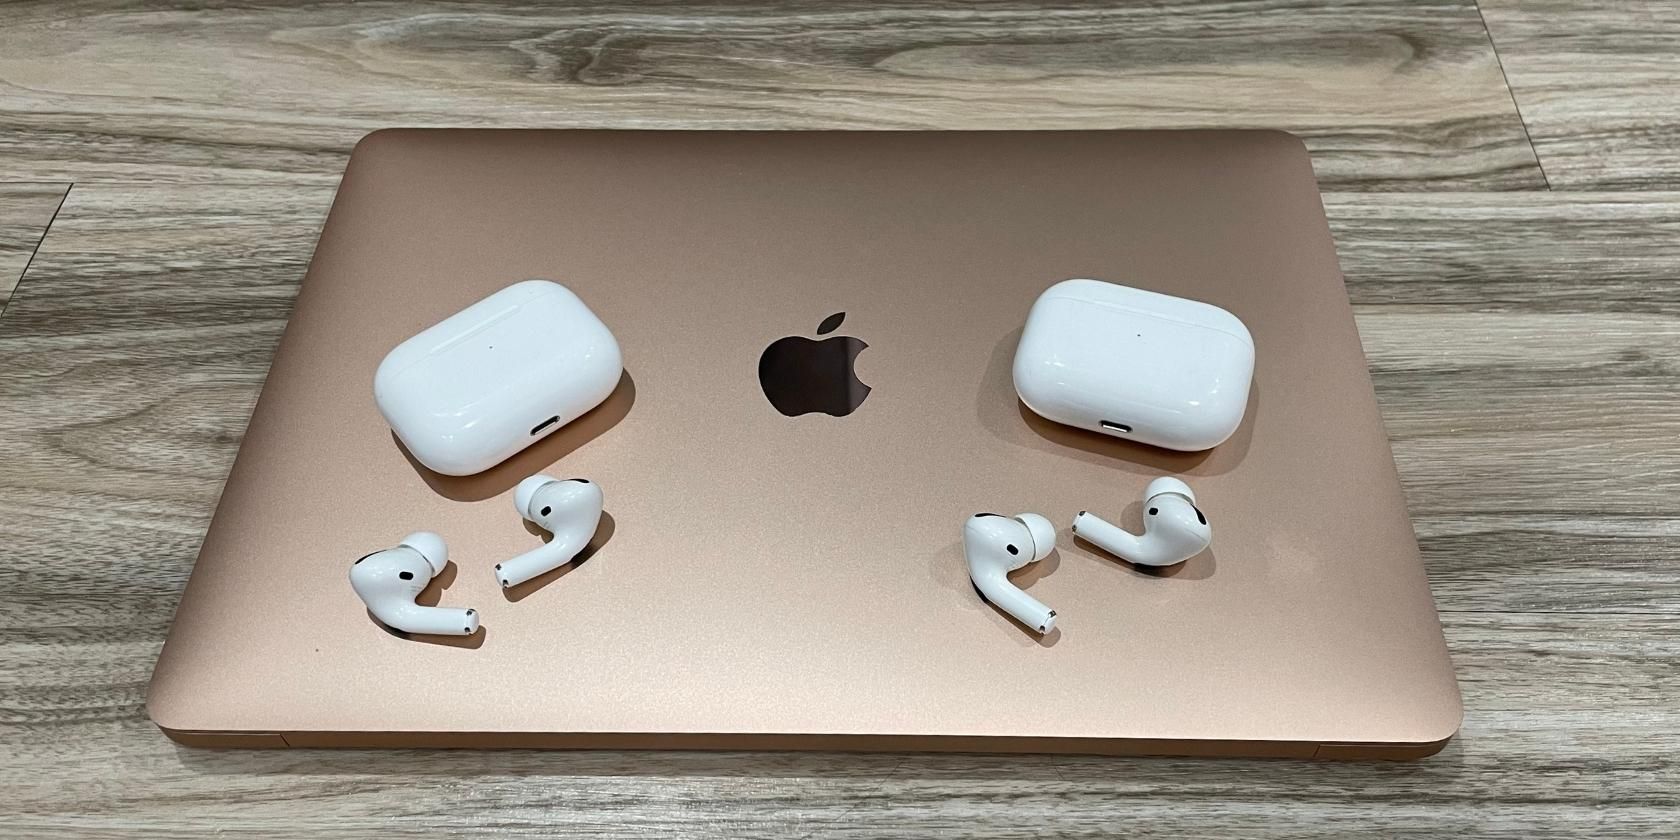 afslappet gås skolde How to Connect Two Sets of AirPods to the Same Mac